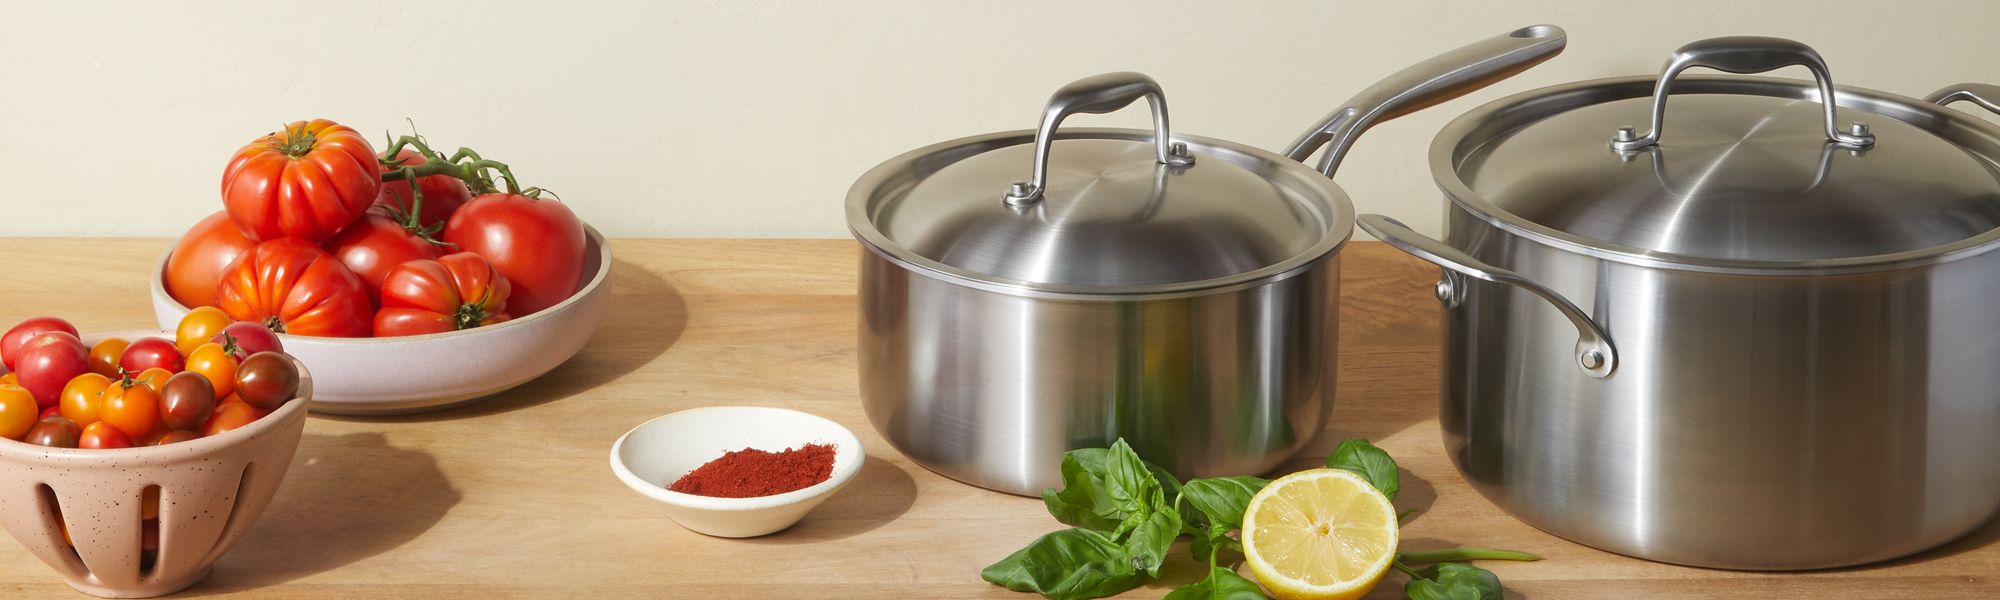 7 Types of Cookware Options for Your Kitchen